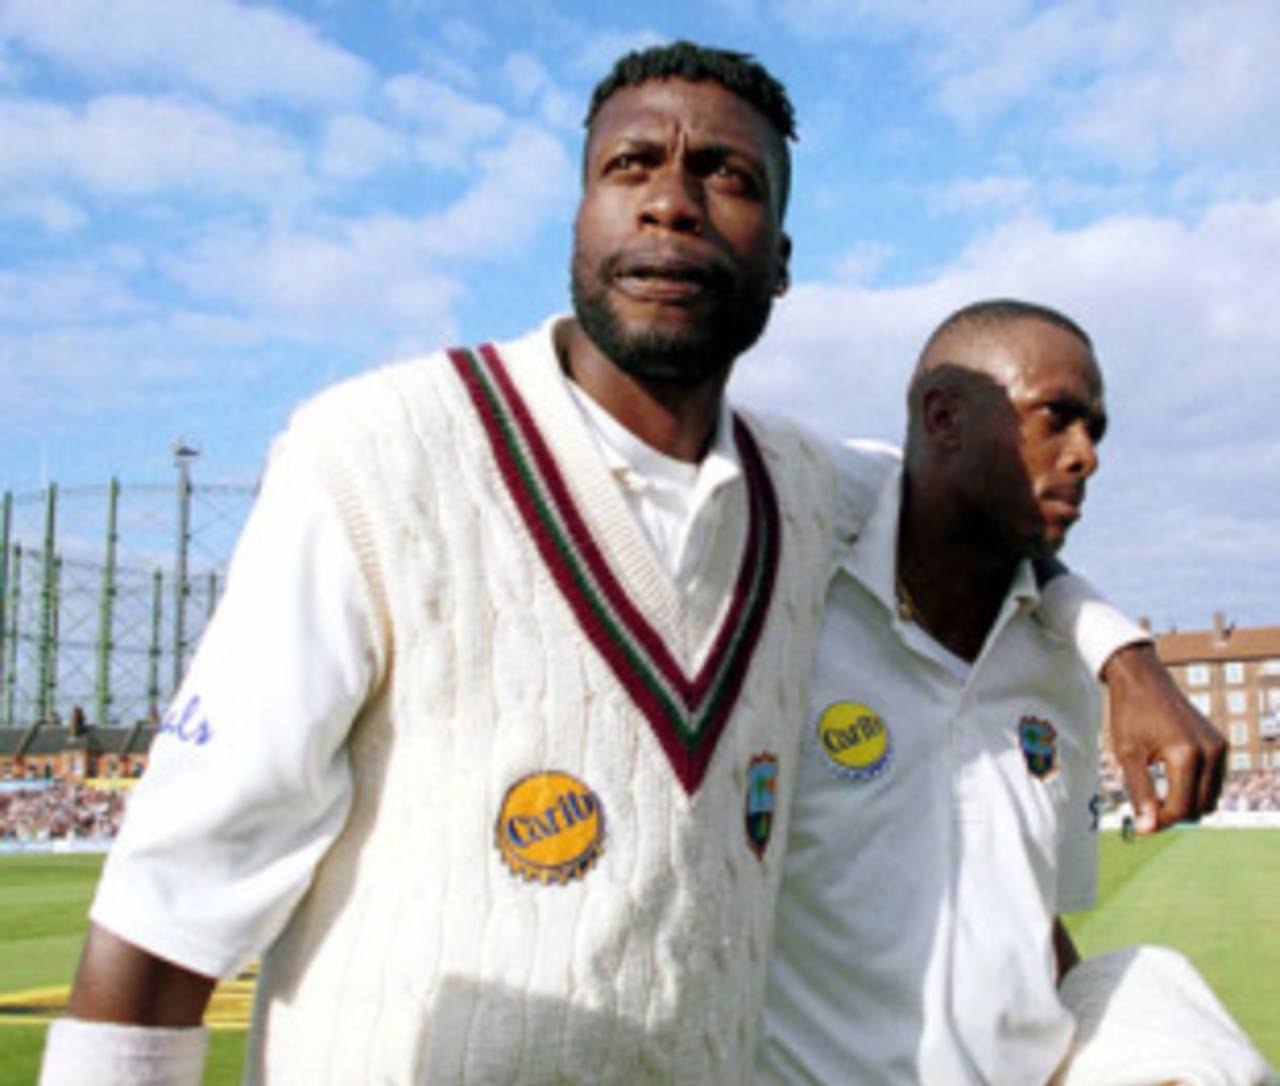 Courtney Walsh and Curtly Ambrose walk off at the end of the Oval Test, England v West Indies, 5th Test, The Oval, September 3, 2000